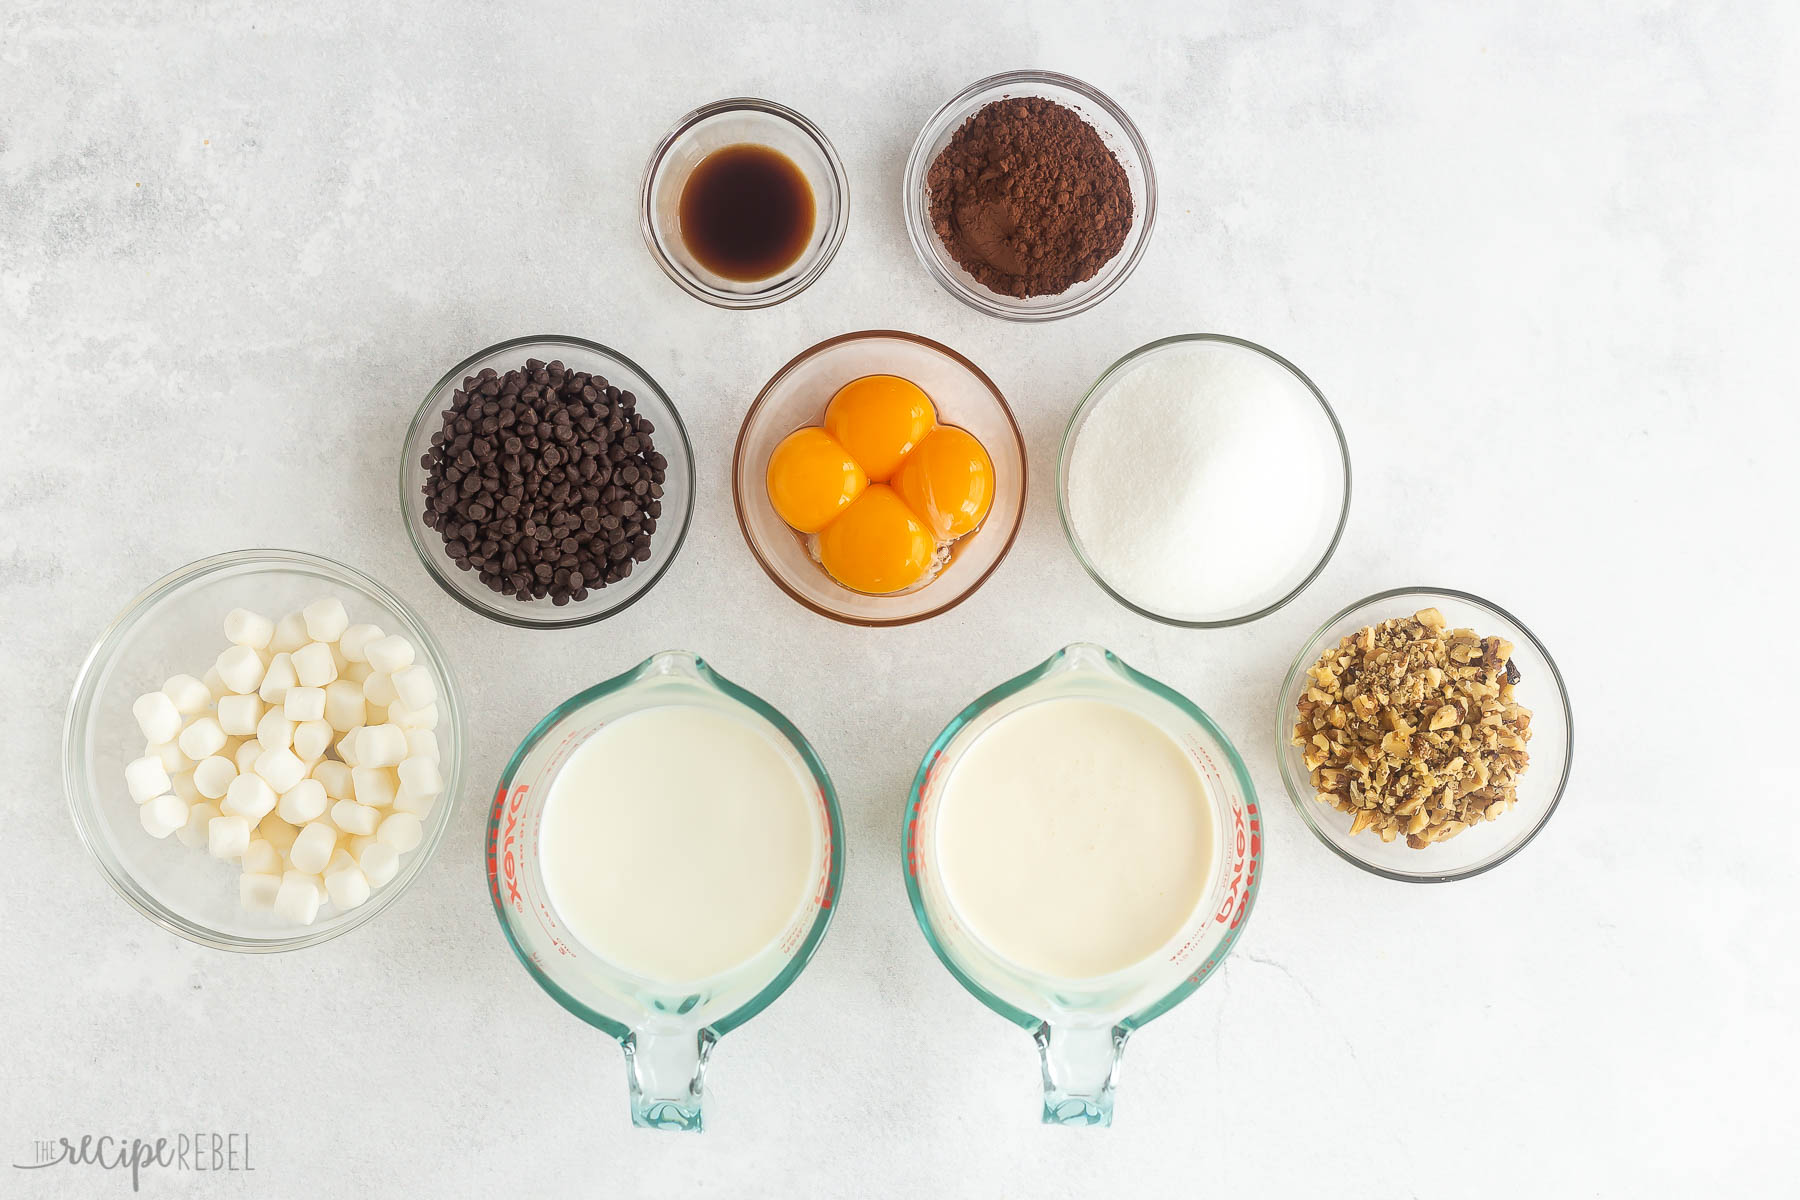 ingredients needed for rocky road ice cream on white background.